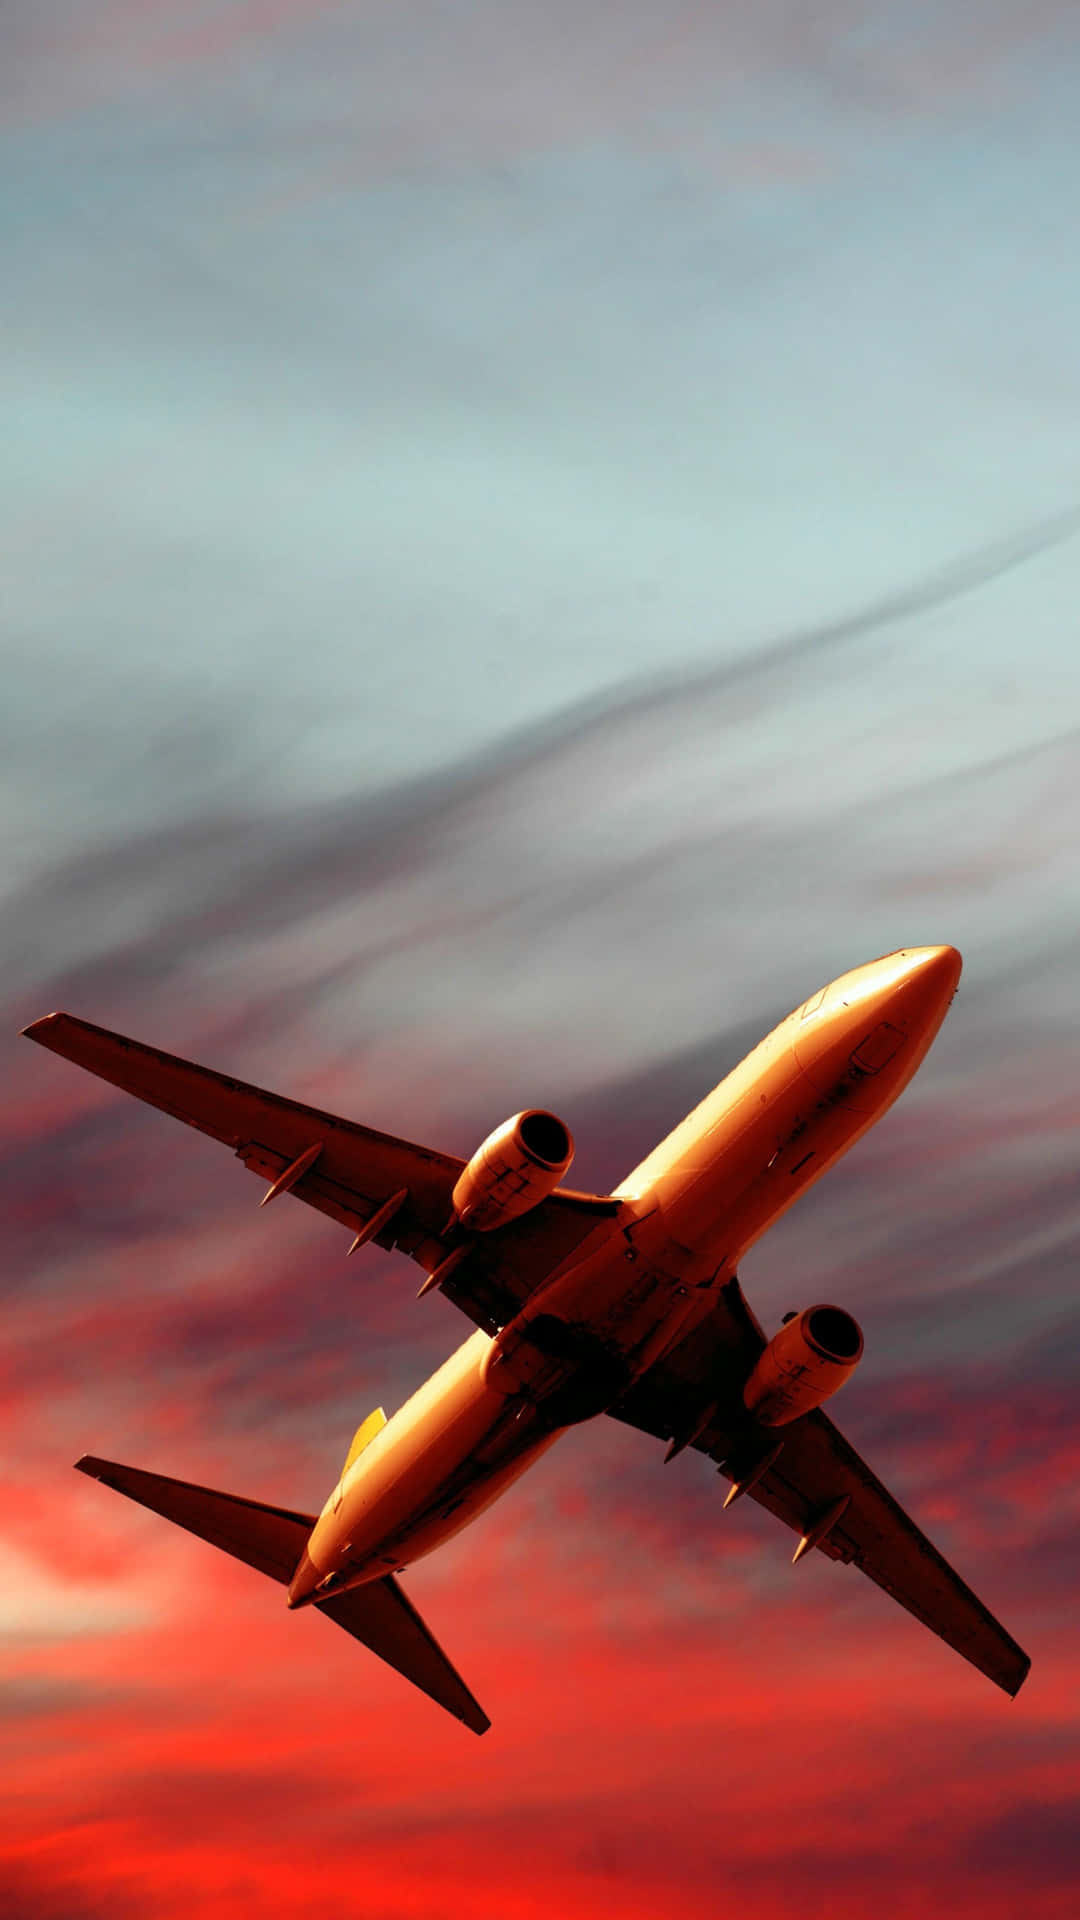 Soar High with this Plane Iphone Wallpaper Wallpaper